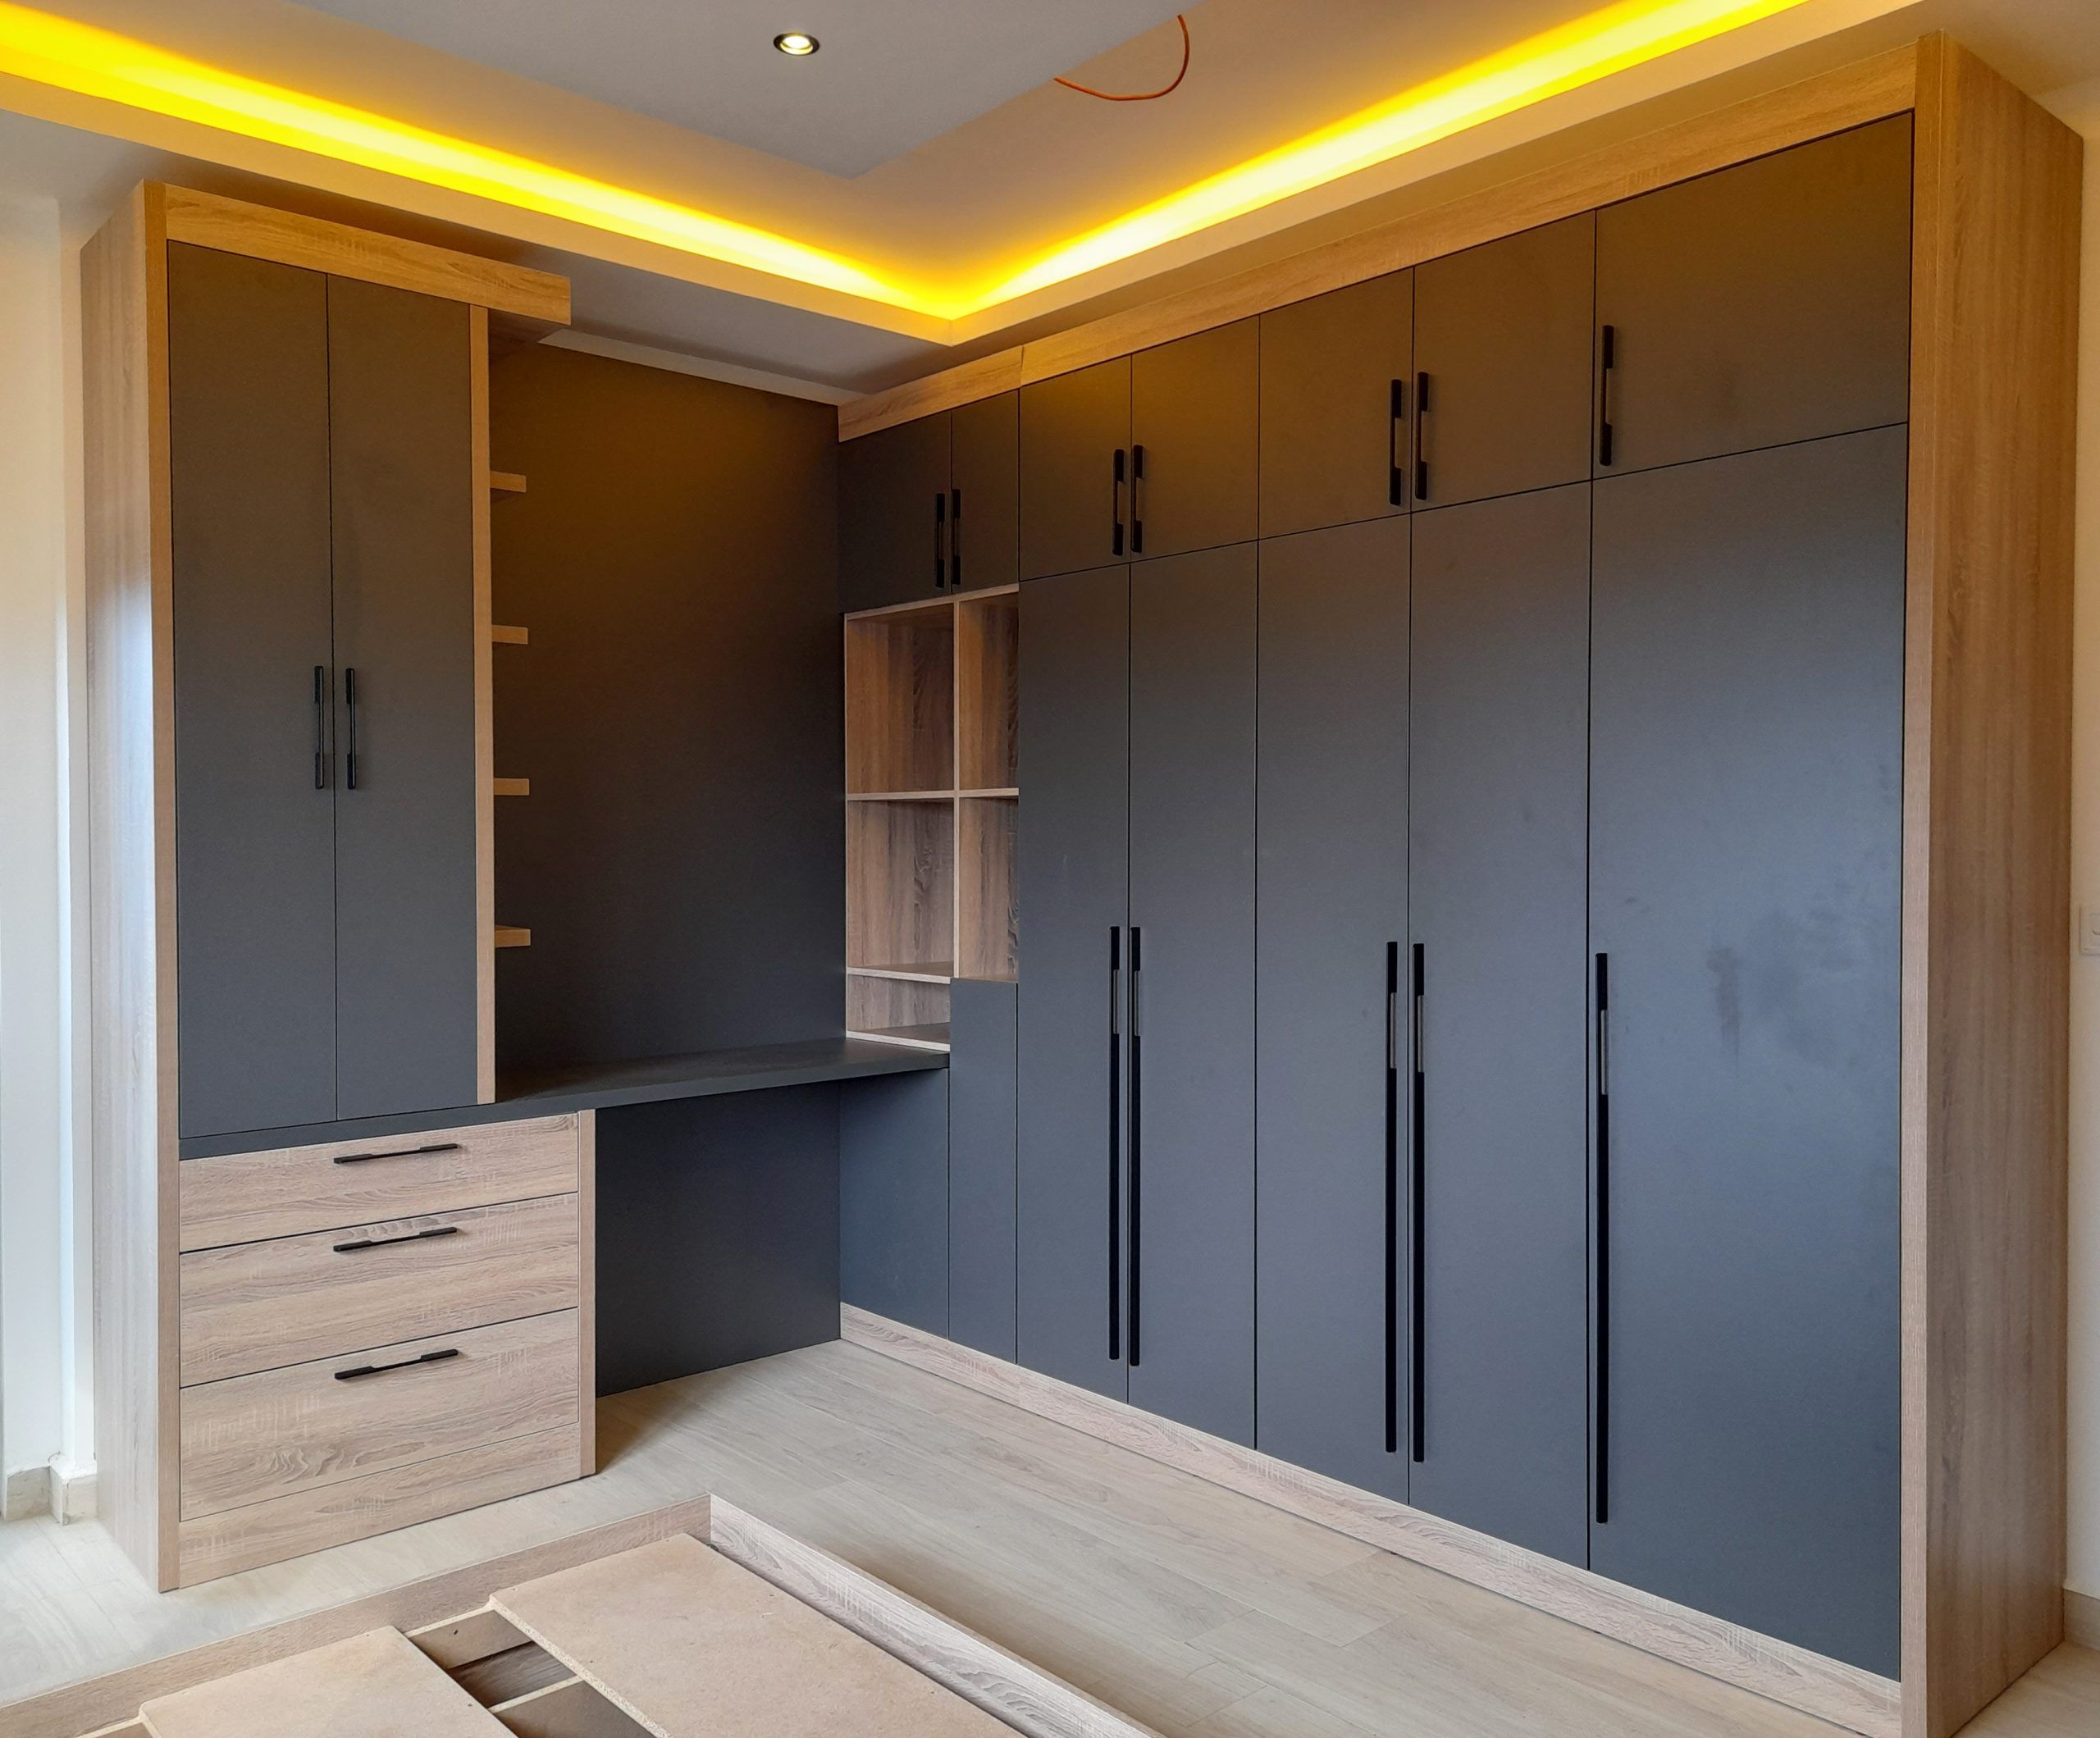 What Are The Ideal Measurements For Buying A Wardrobe? | 44 Wood In 60 Inch Wardrobes (Gallery 11 of 20)